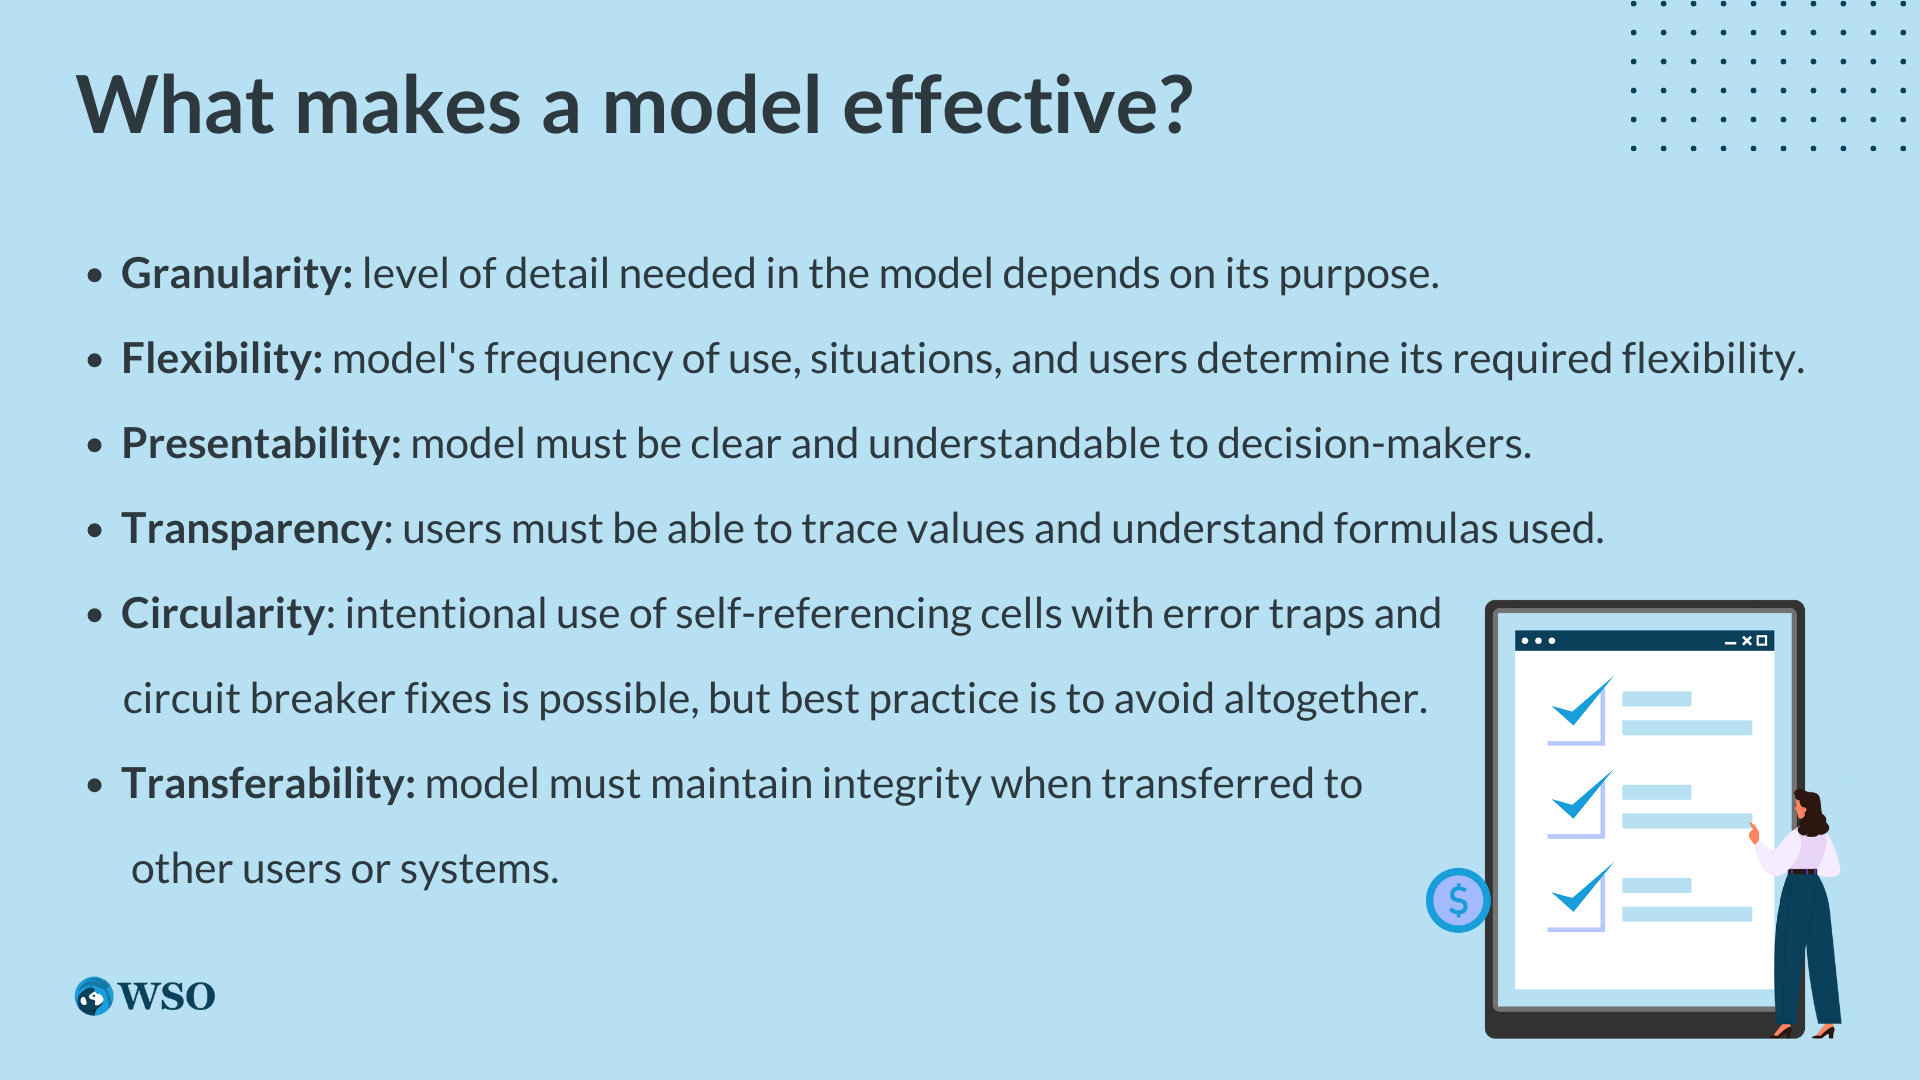 What makes a model effective?